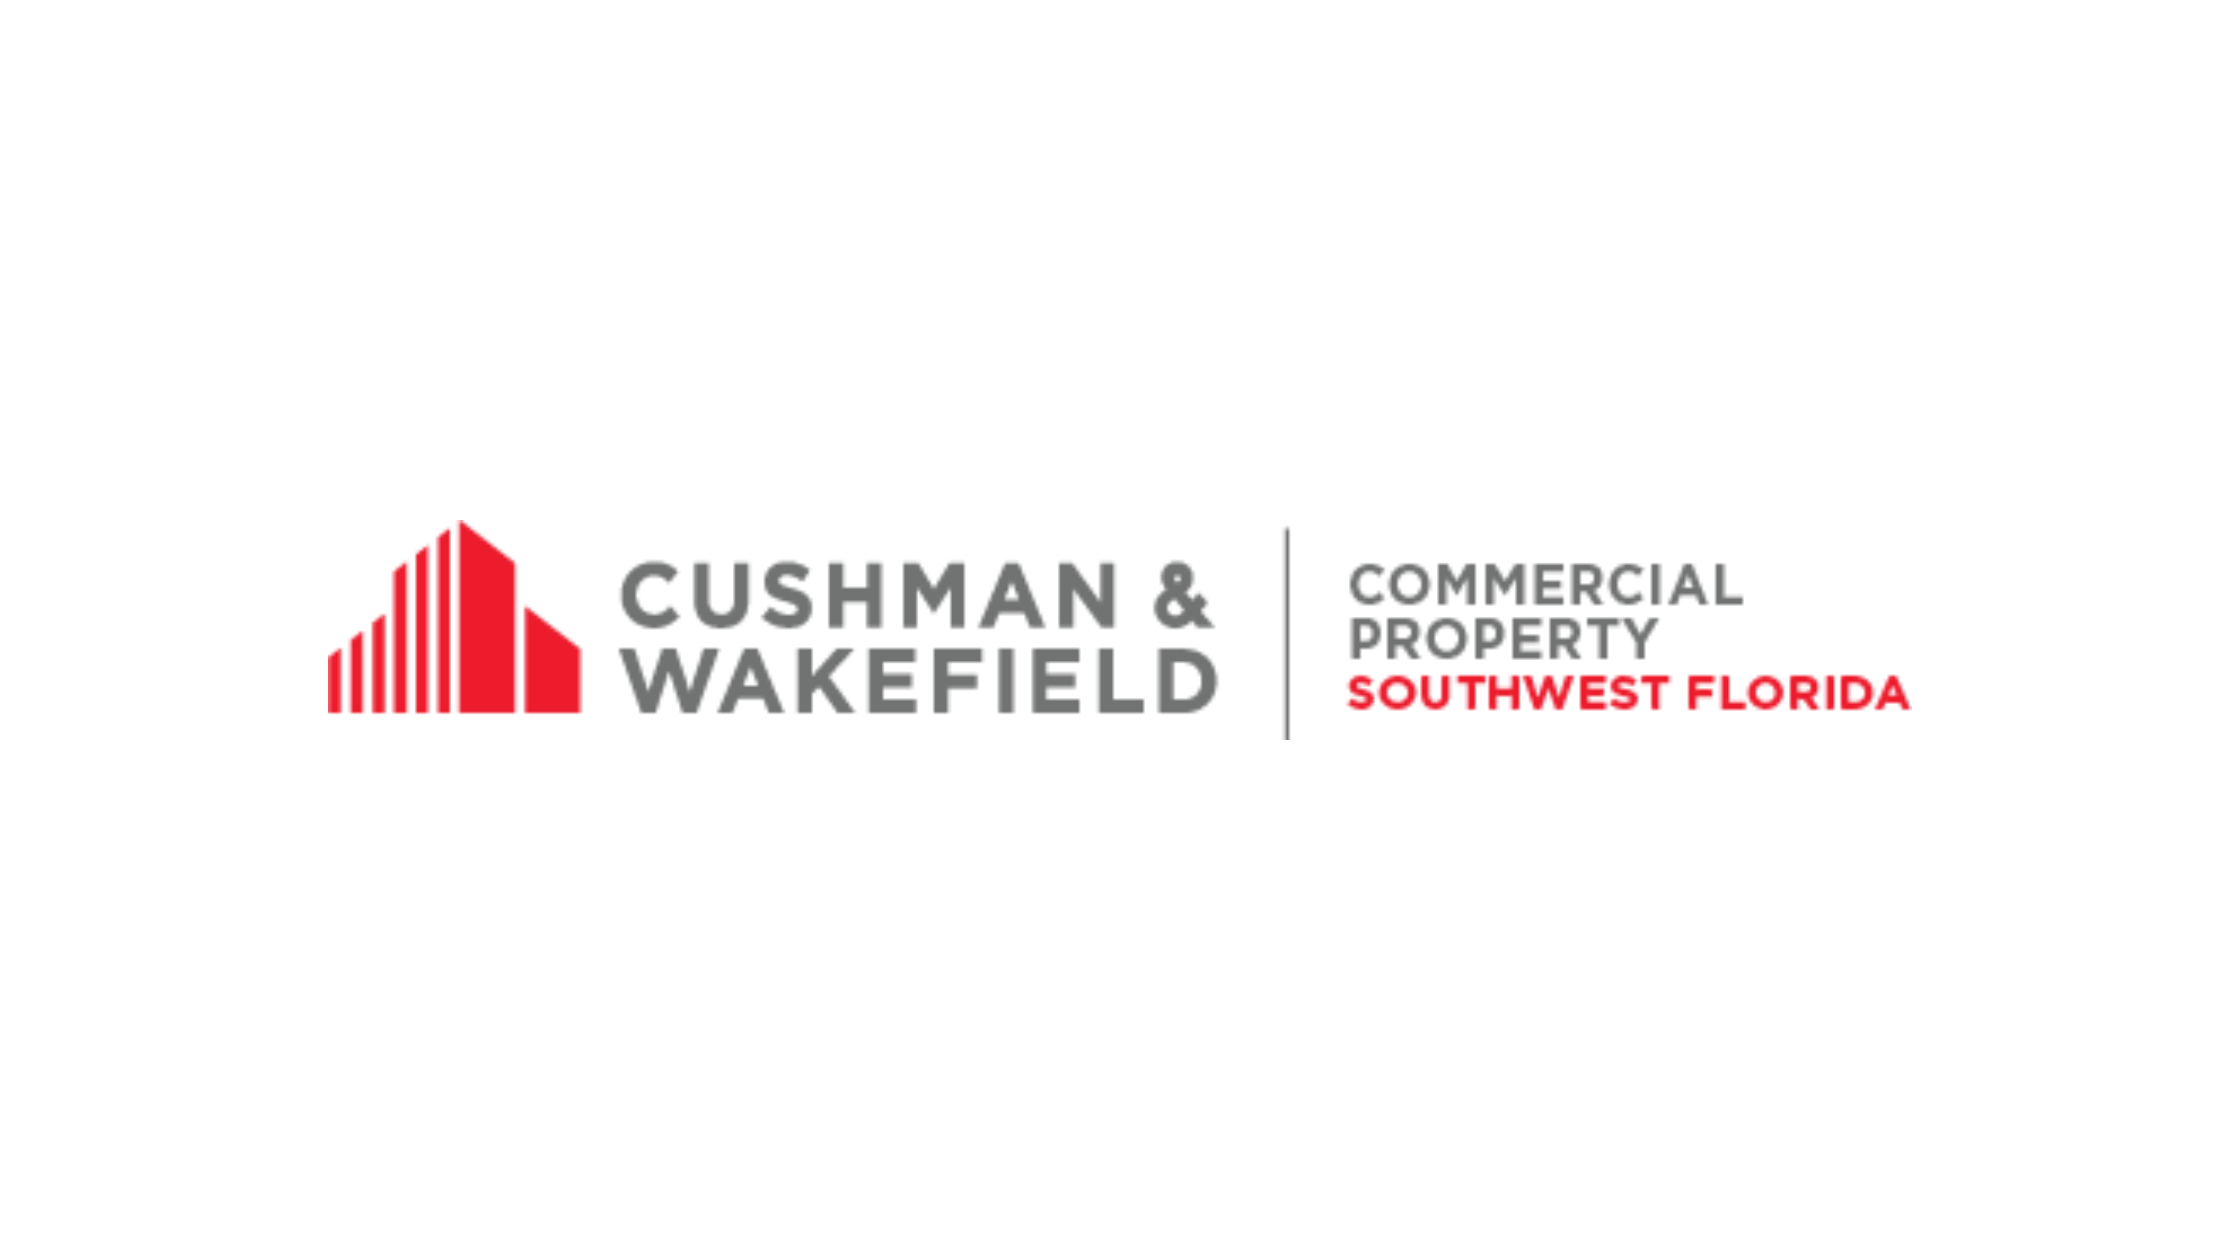 Cushman & Wakefield | Commercial Property Southwest Florida earns an unprecedented two 2023 CoStar Impact Awards